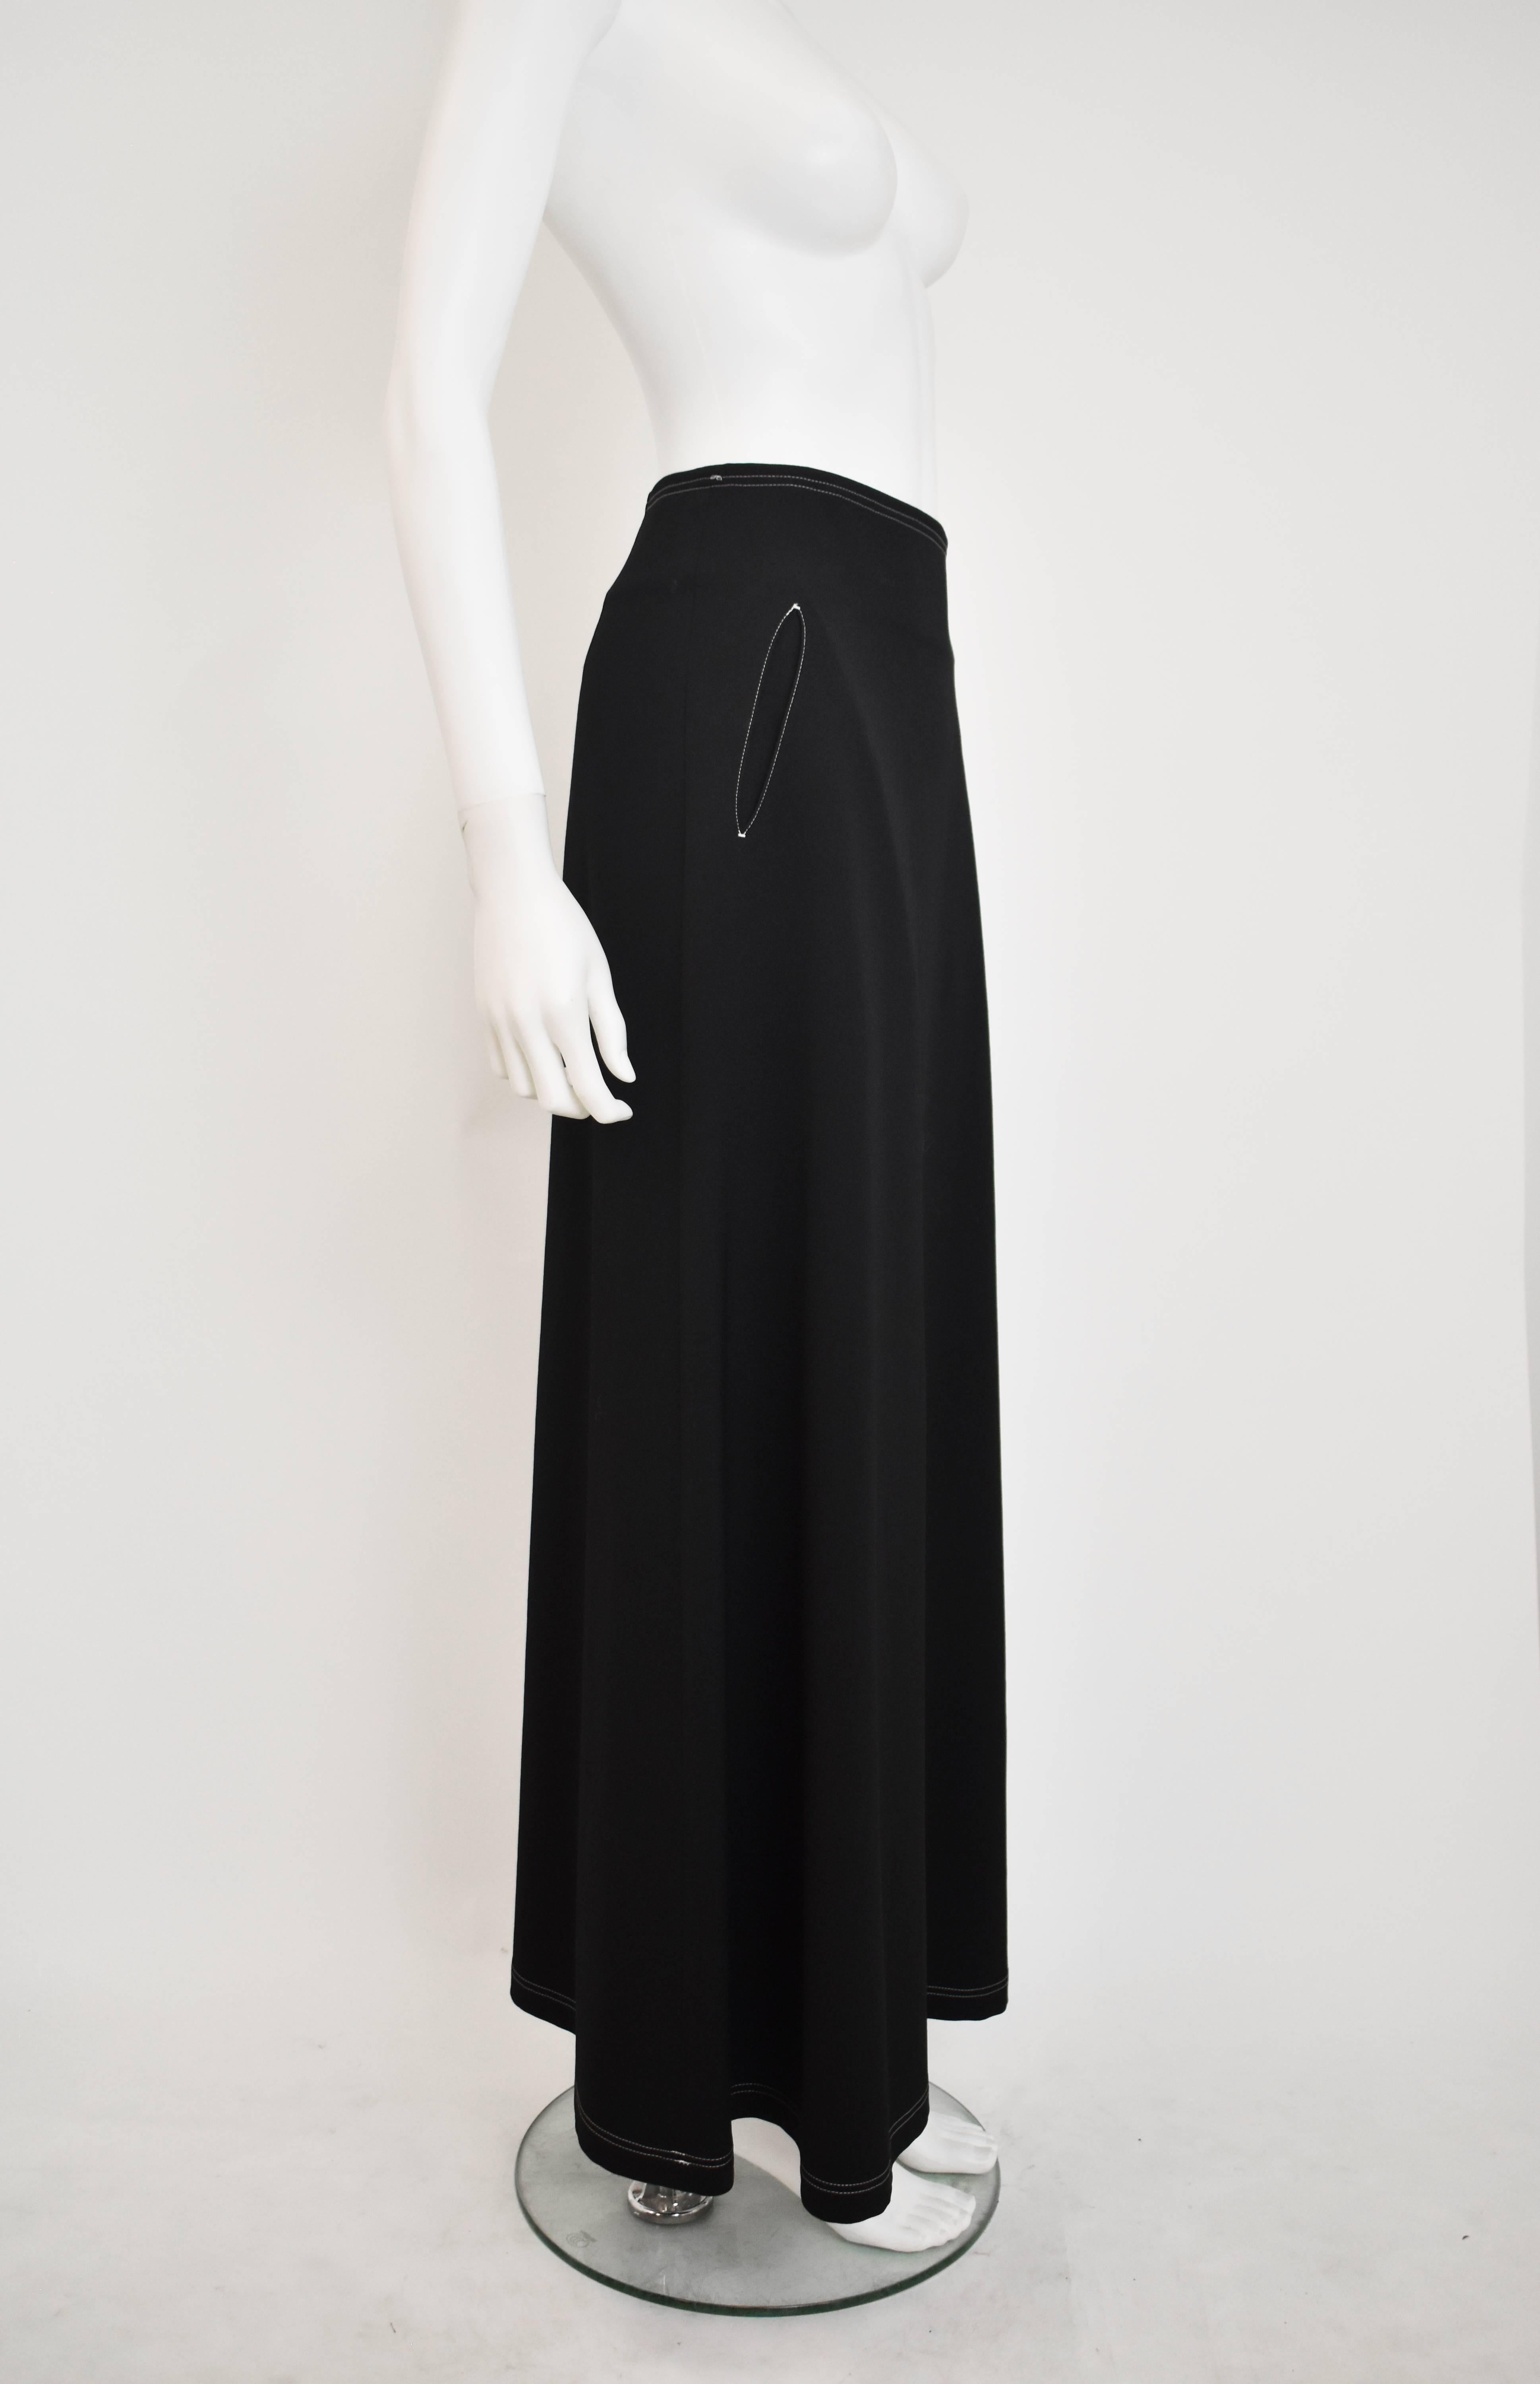 A classic black A-line skirt from Y’s by Yohji Yamamoto. The skirt has a simple shape and a longline fit. It is made from 100% black wool with white contrast stitching around the waistband, pockets and seams. The skirt features two pockets at the